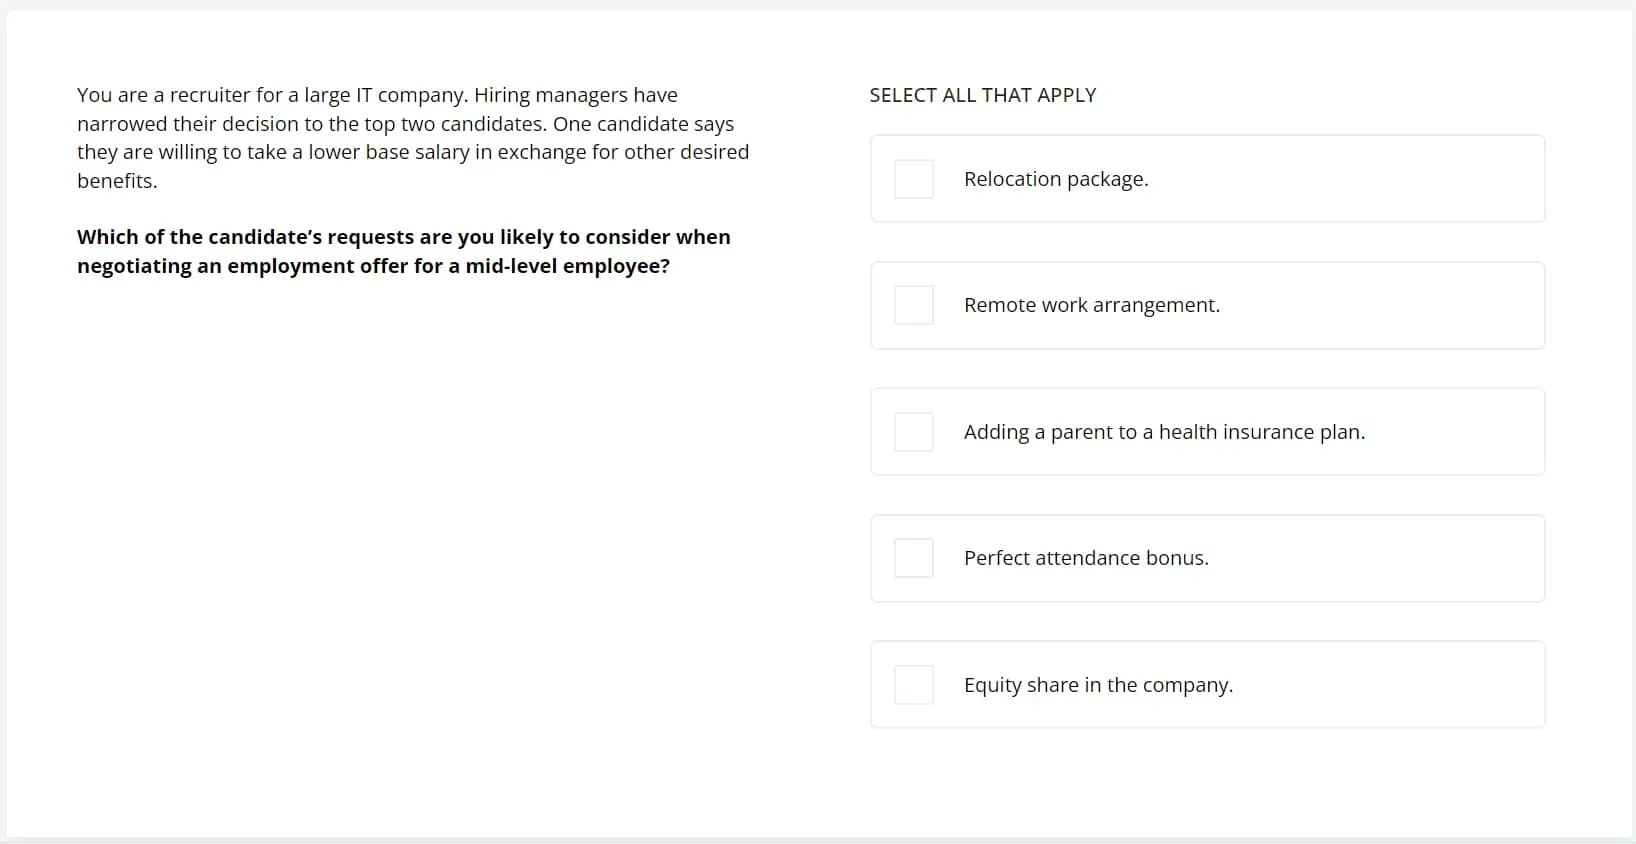 A preview question from TestGorilla's Leadership & People Management test